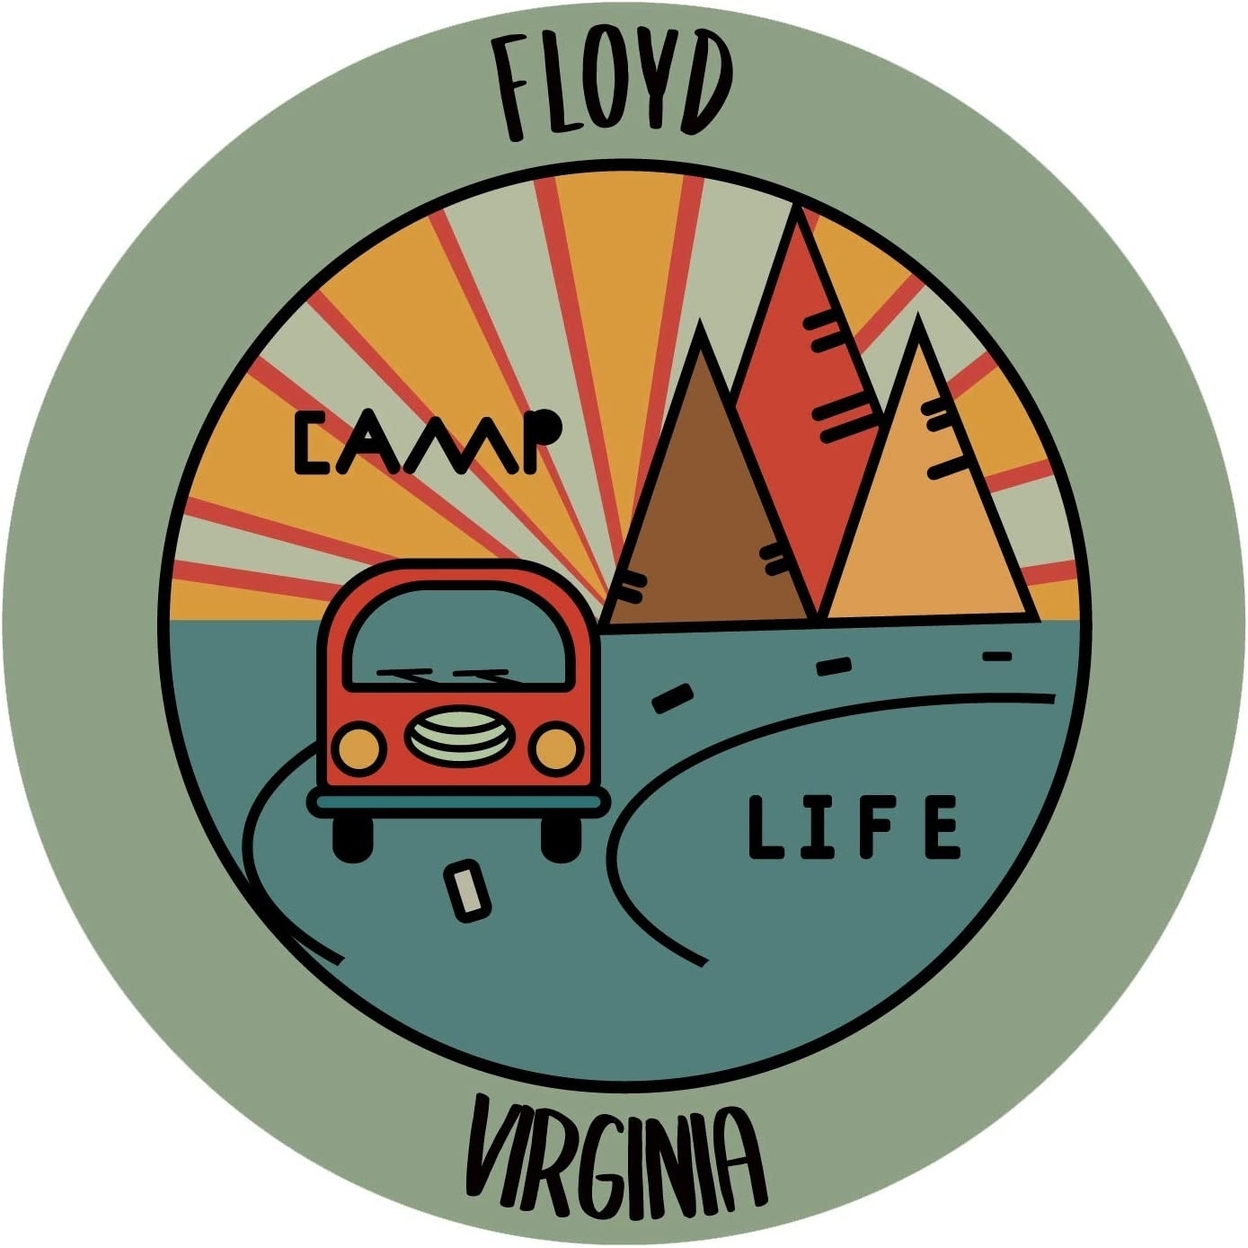 Floyd Virginia Camp Life Souvenir Decorative Stickers Choice Of Size - 4-Pack, 2-Inch